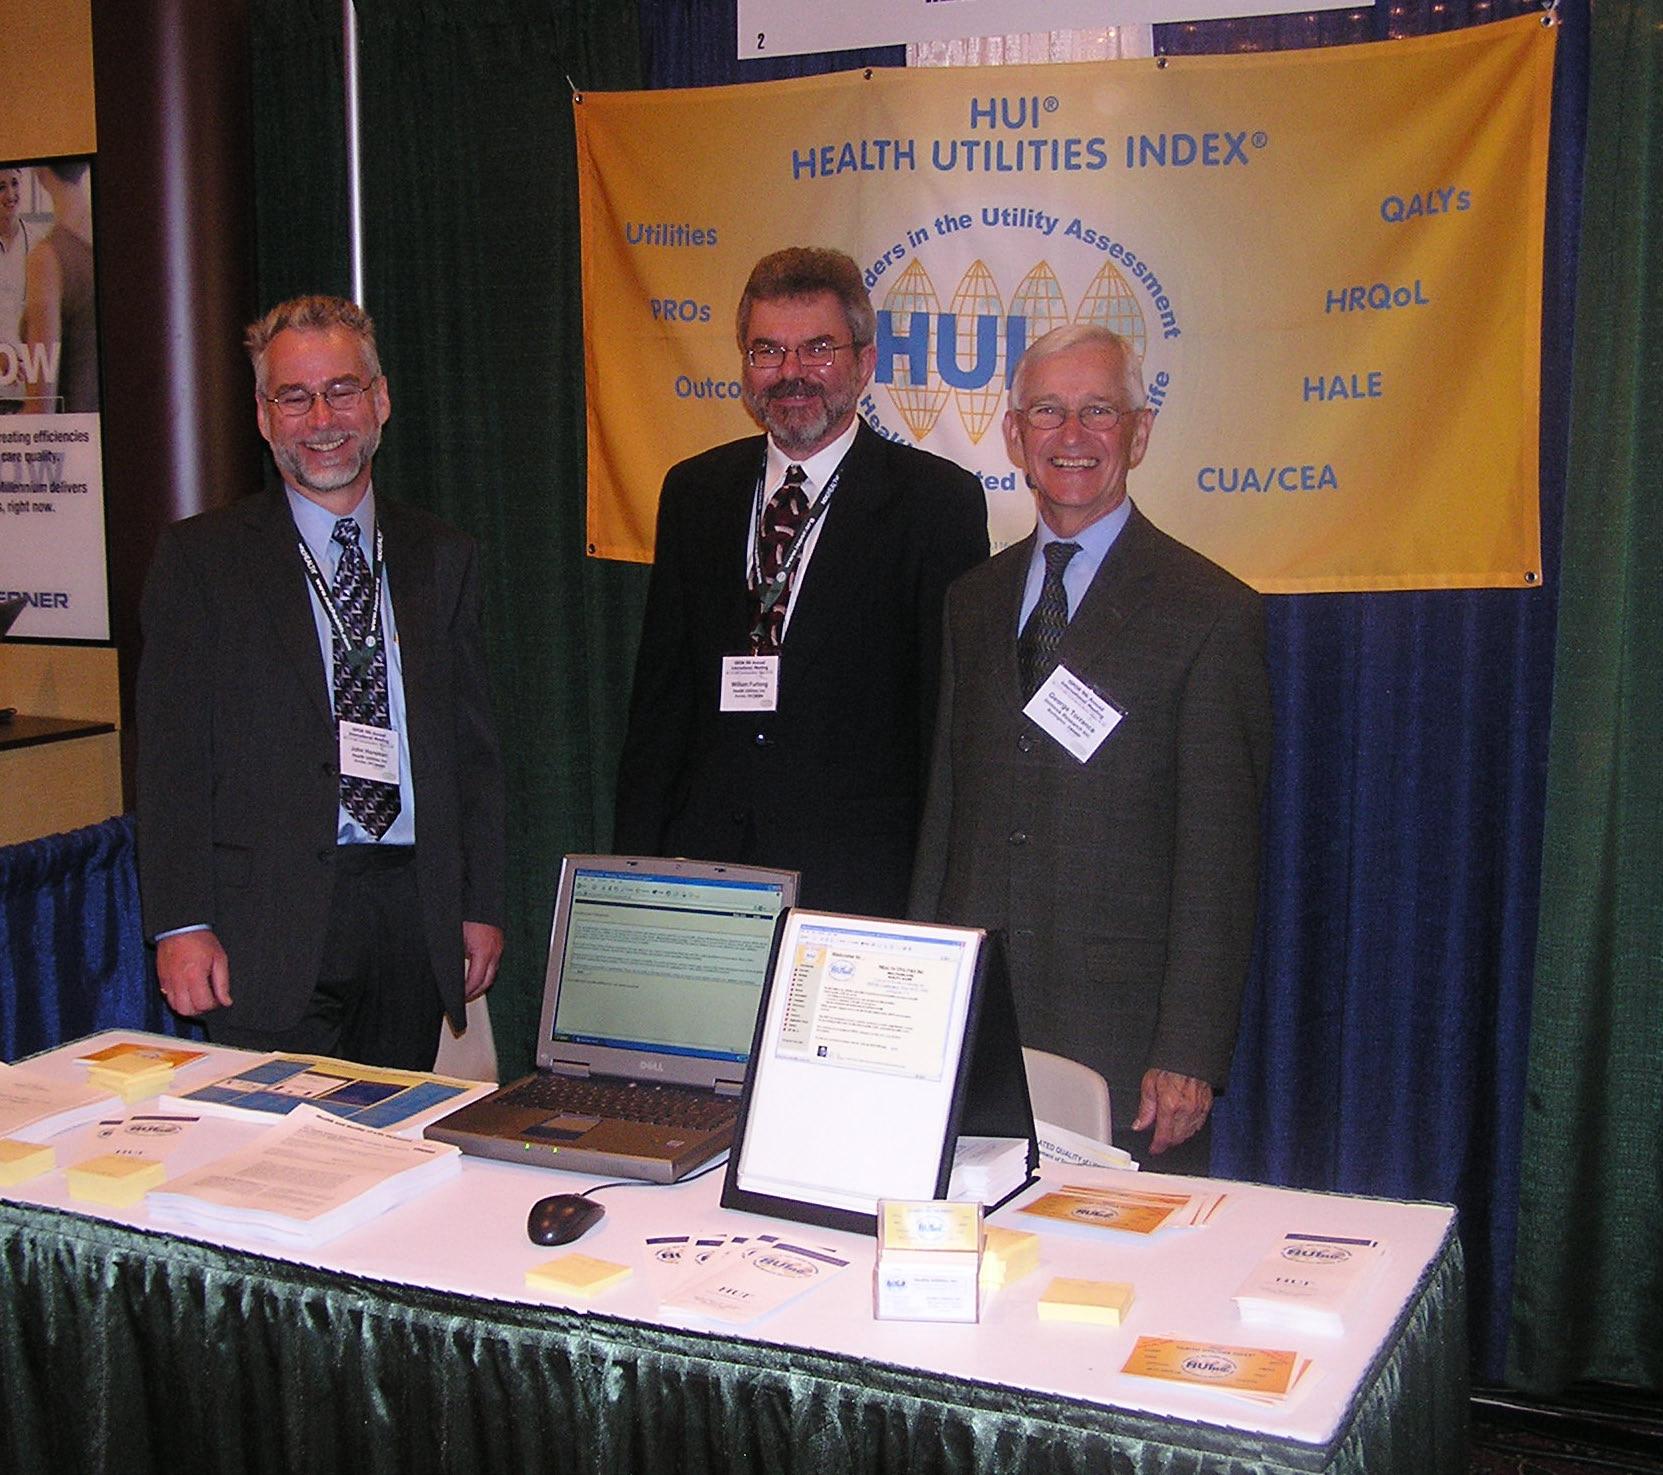 L to R - John Horsman, Bill Furlong, George Torrance at the HUInc Booth, International Society for Pharmacoeconomics and Outcomes Research - ISPOR, May 2003, Arlington, VA, USA.